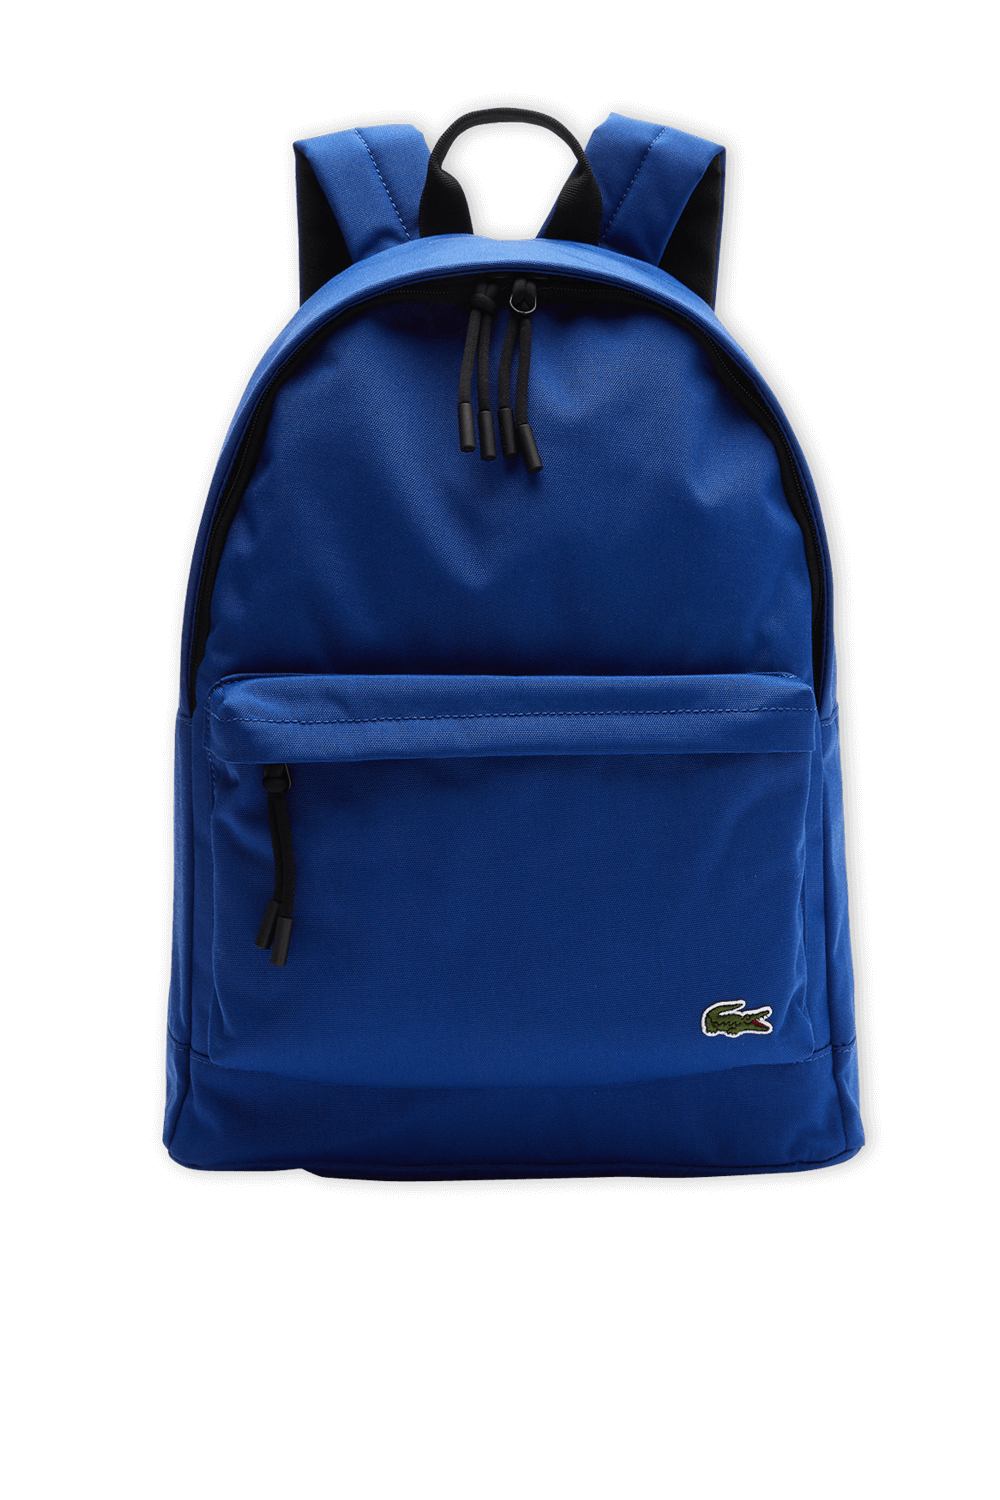 Neocroc Canvas Backpack In Cosmique Blue LACOSTE